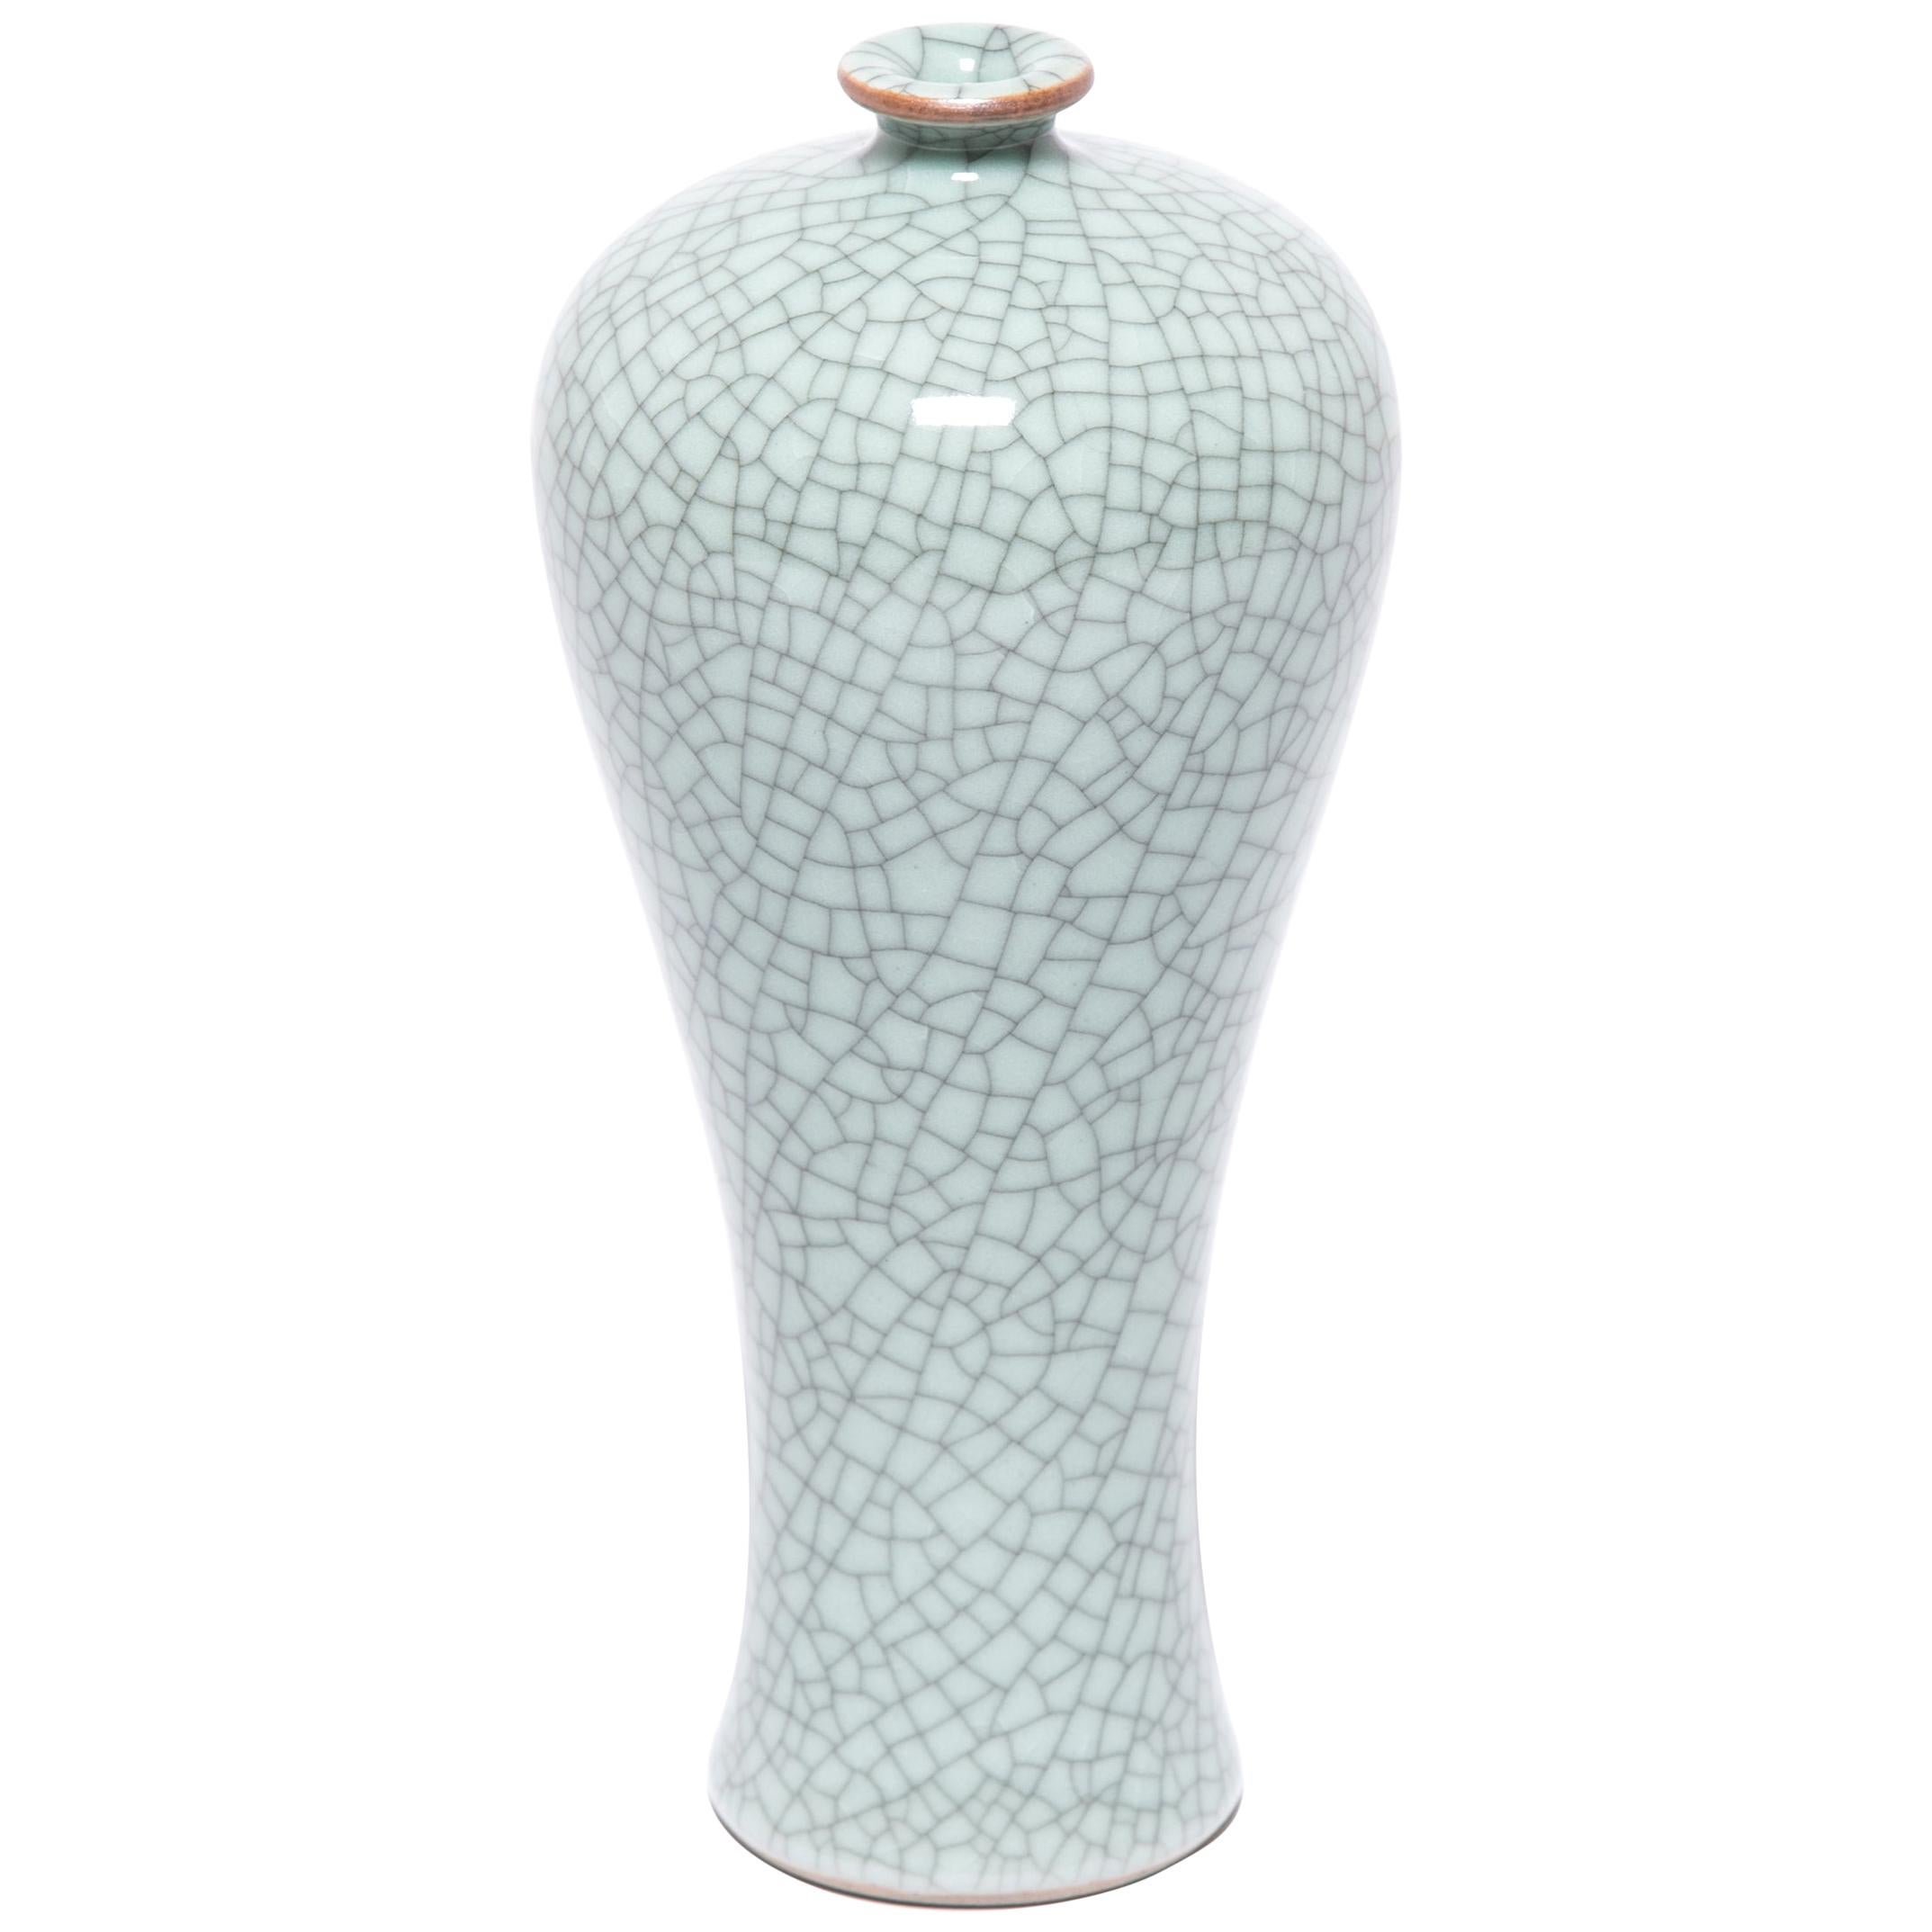 Petite Chinese Crackled Meiping Vase